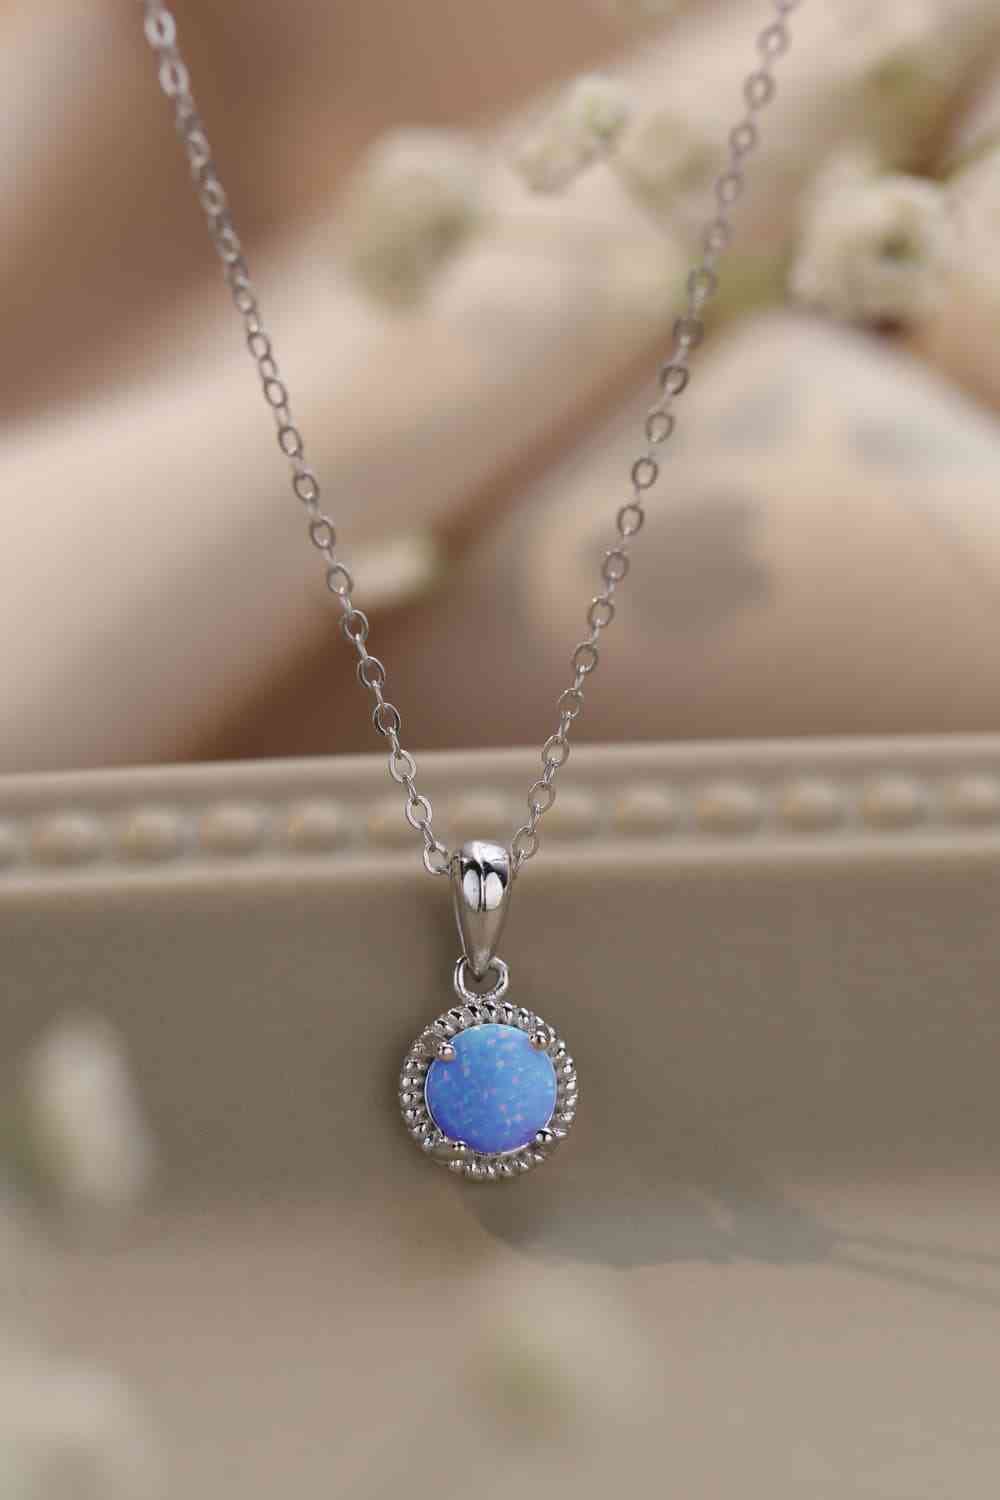 Opal Round Pendant Chain Necklace Sky Blue One Size